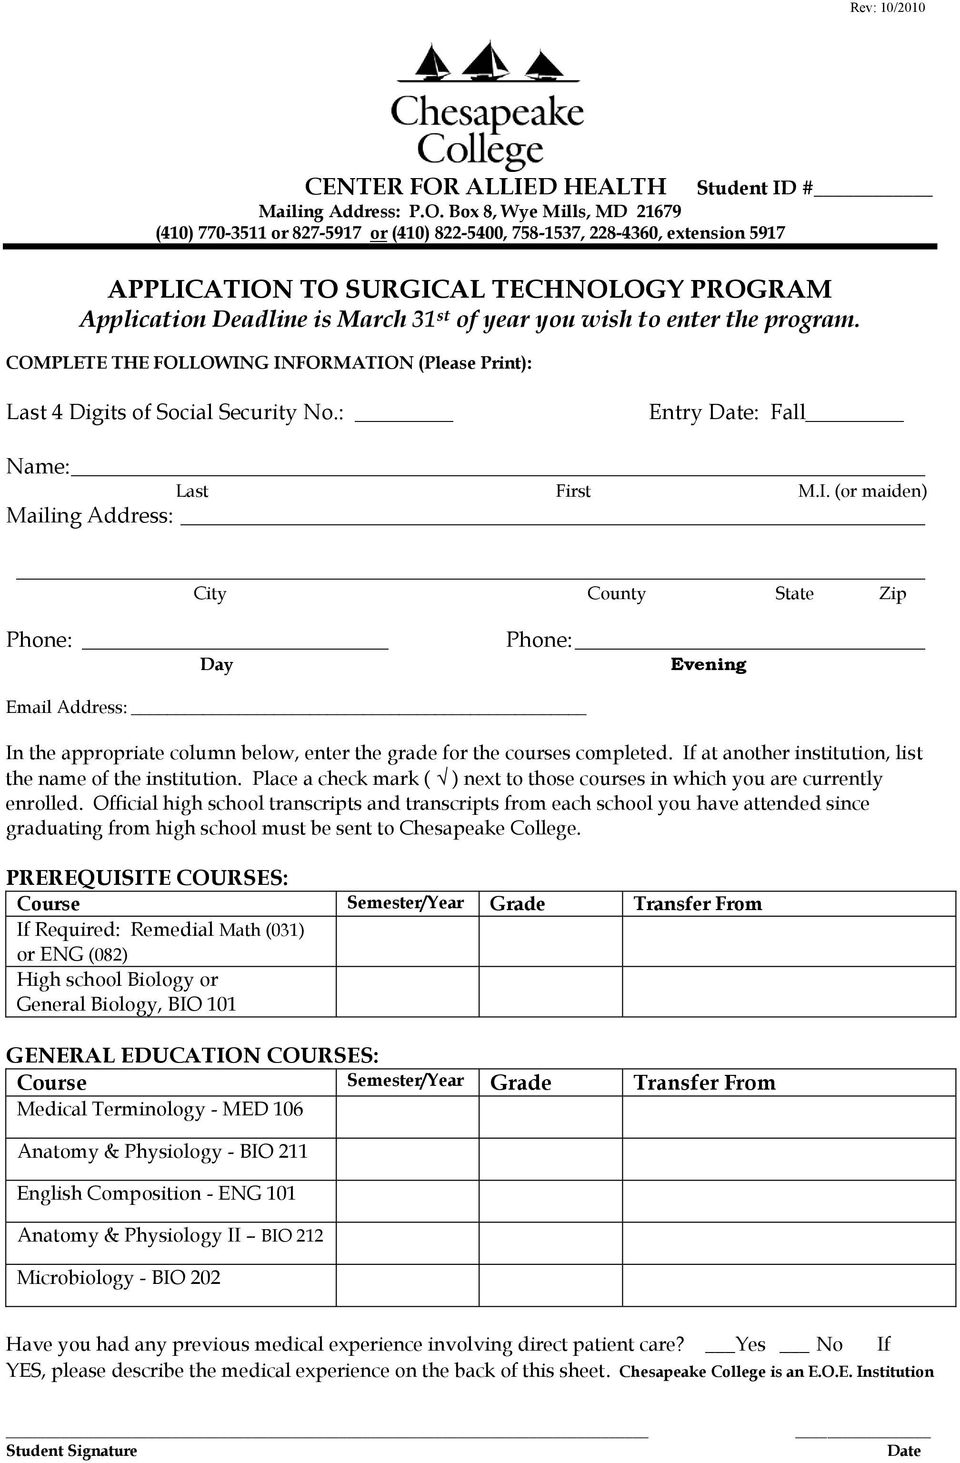 Box 8, Wye Mills, MD 21679 (410) 770-3511 or 827-5917 or (410) 822-5400, 758-1537, 228-4360, extension 5917 APPLICATION TO SURGICAL TECHNOLOGY PROGRAM Application Deadline is March 31 st of year you